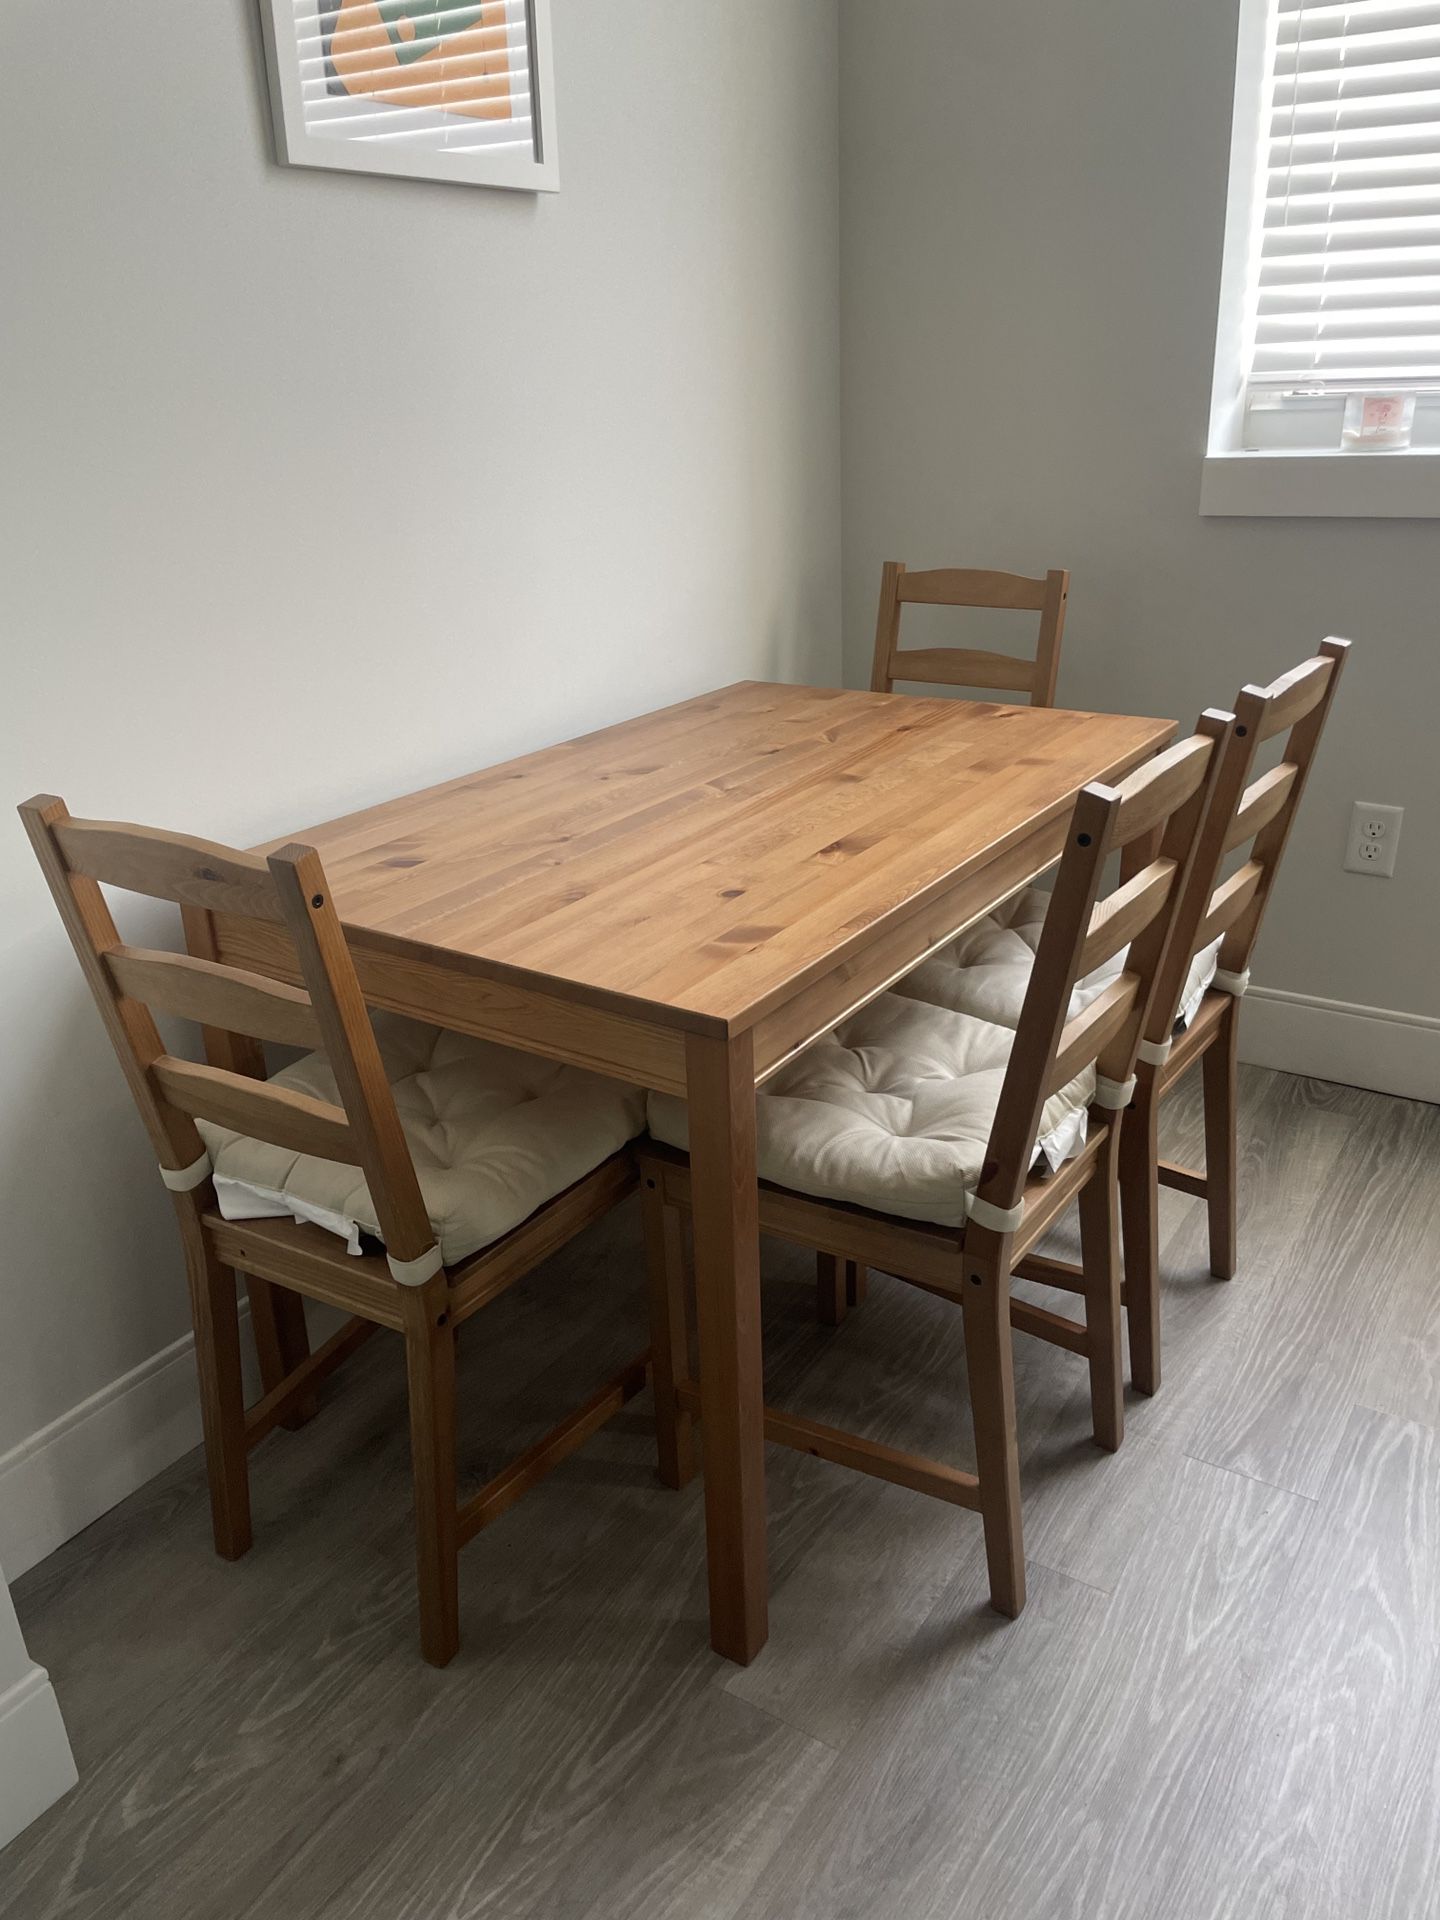 For Sale IKEA Dining Room 